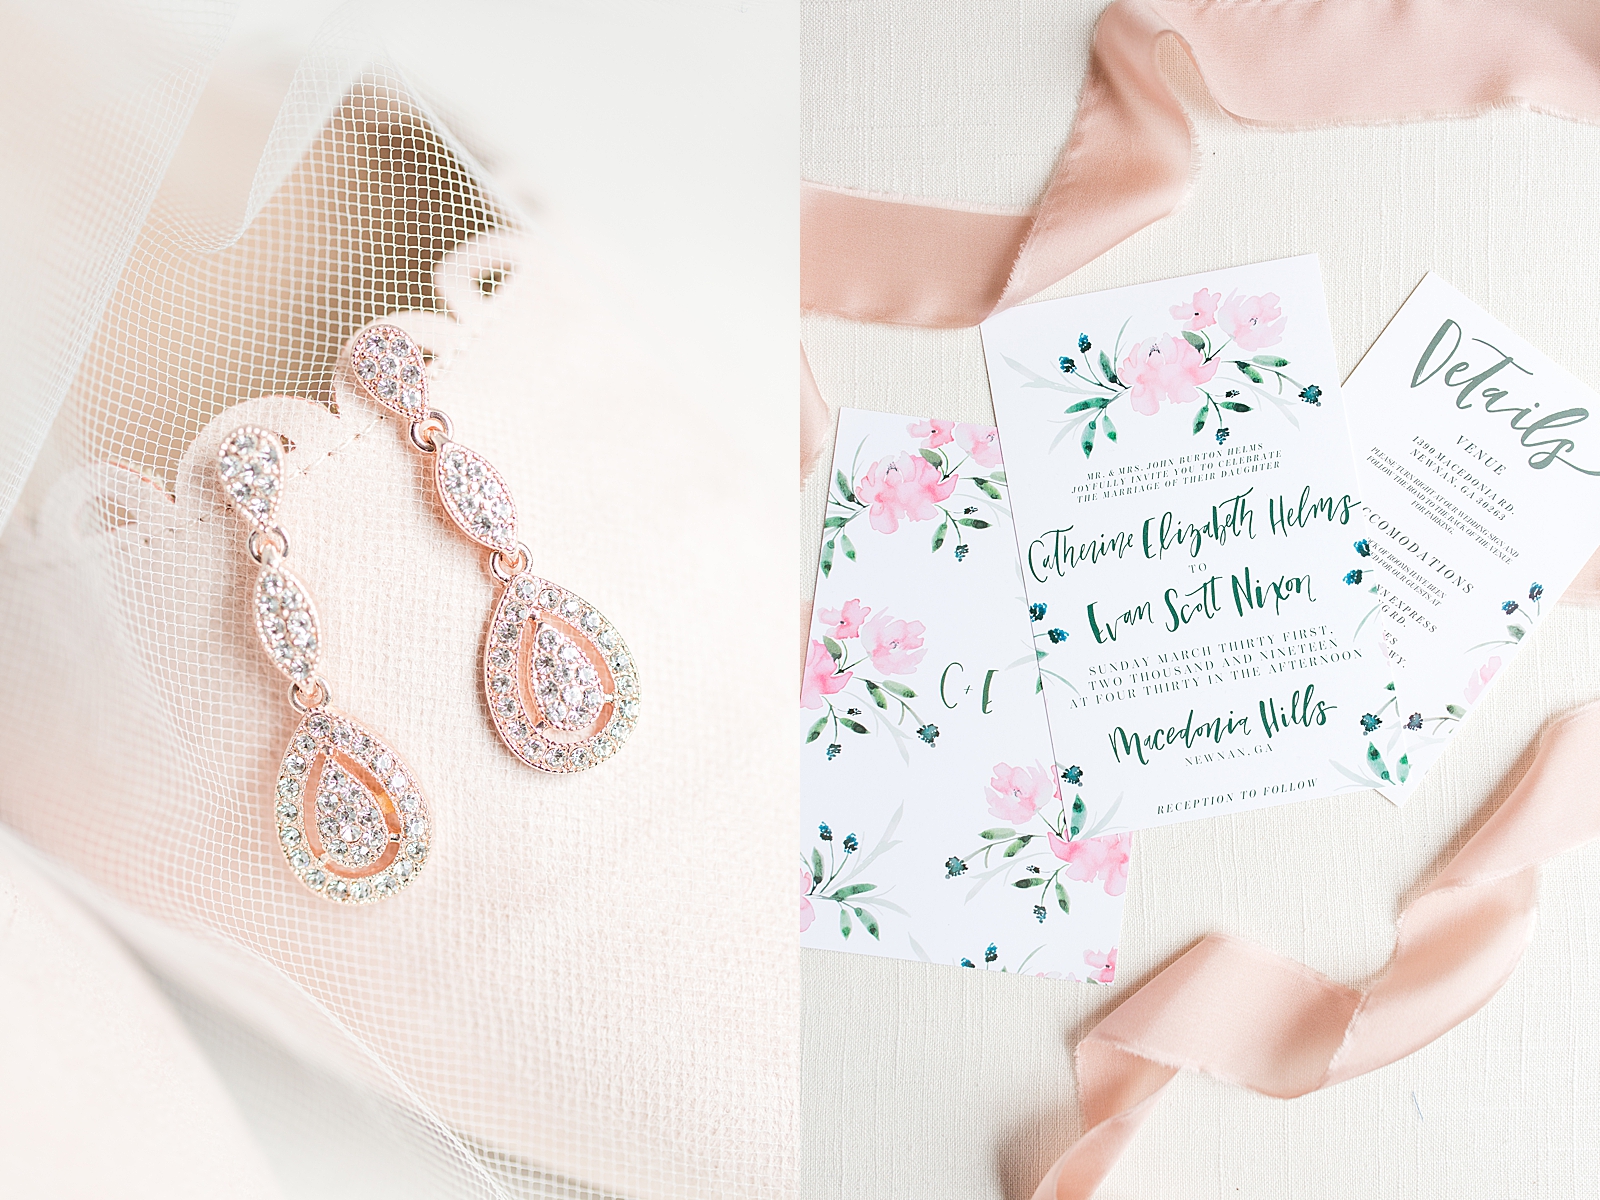 Macedonia Hills Wedding Brides Shoes Veil and Earrings and Invitation Suite Photos